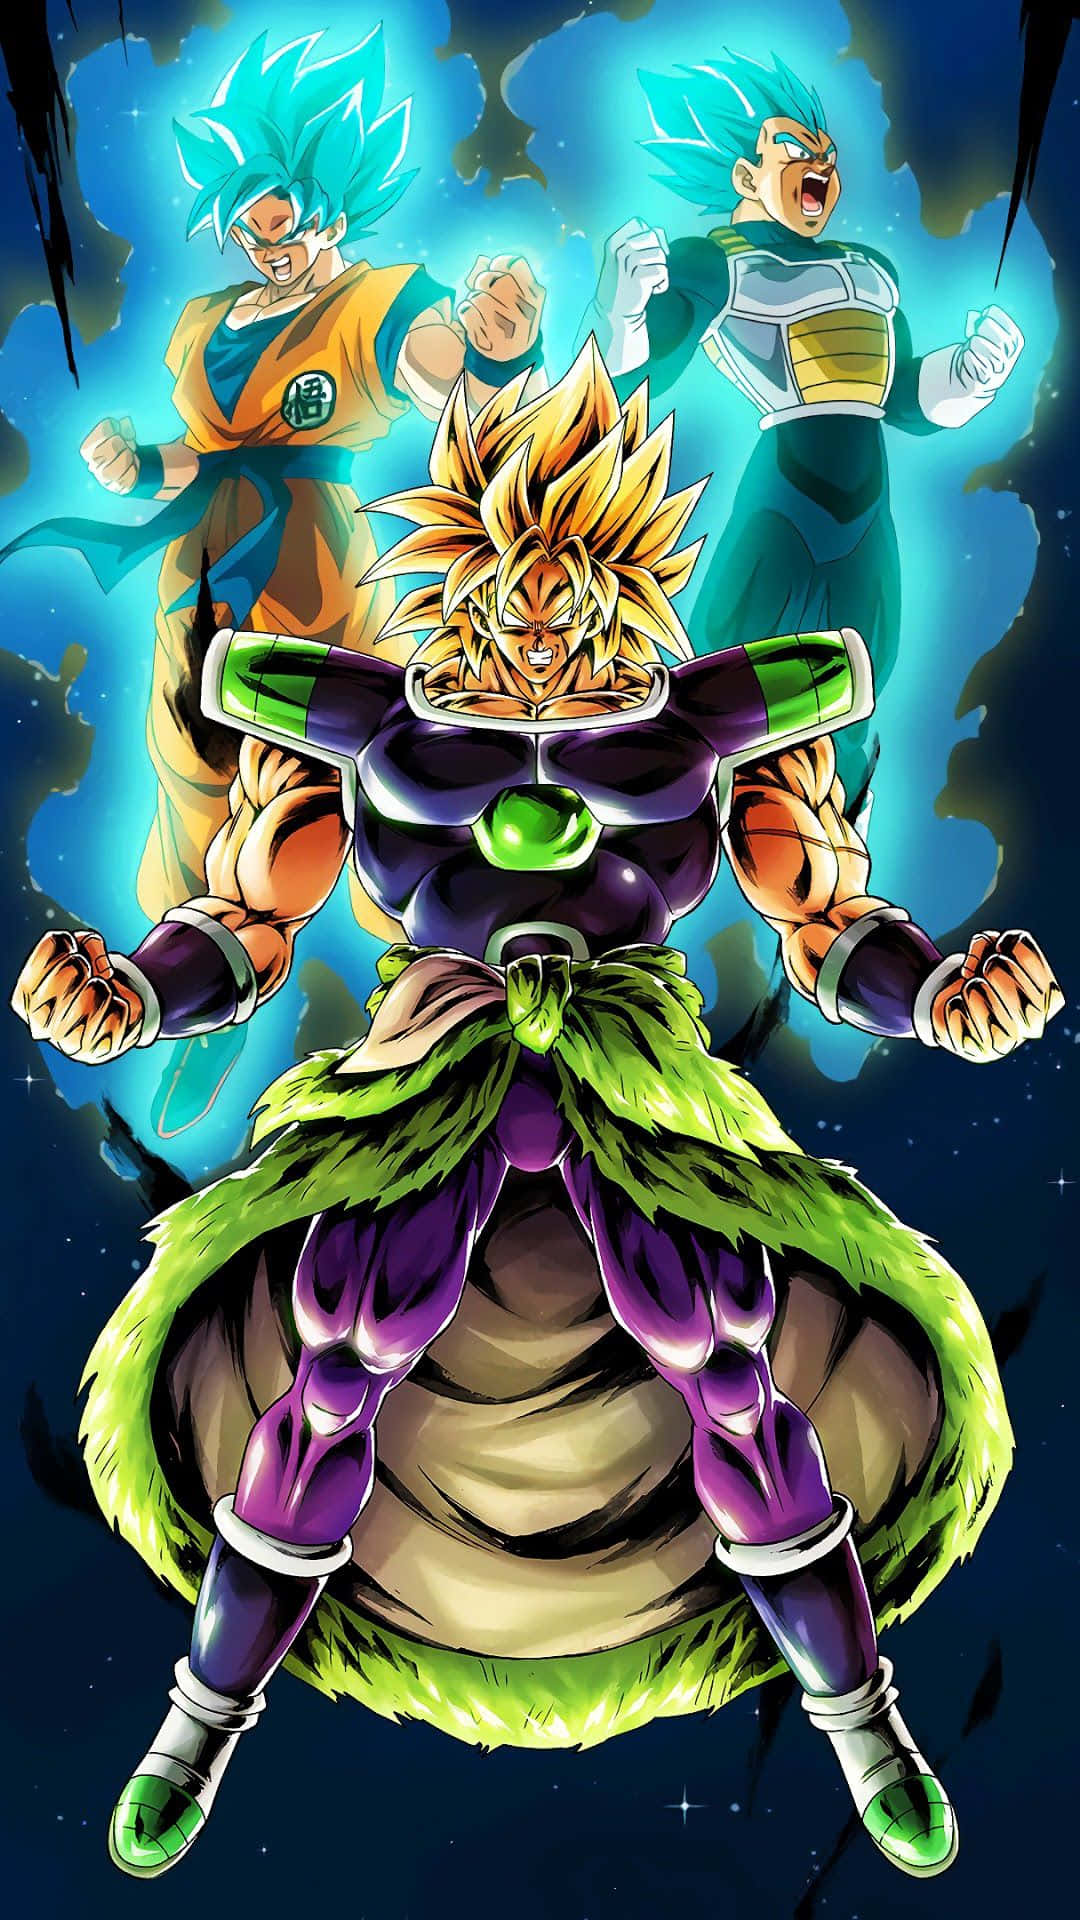 Experience the thrills of the incredible Broly in Dragon Ball Z Wallpaper